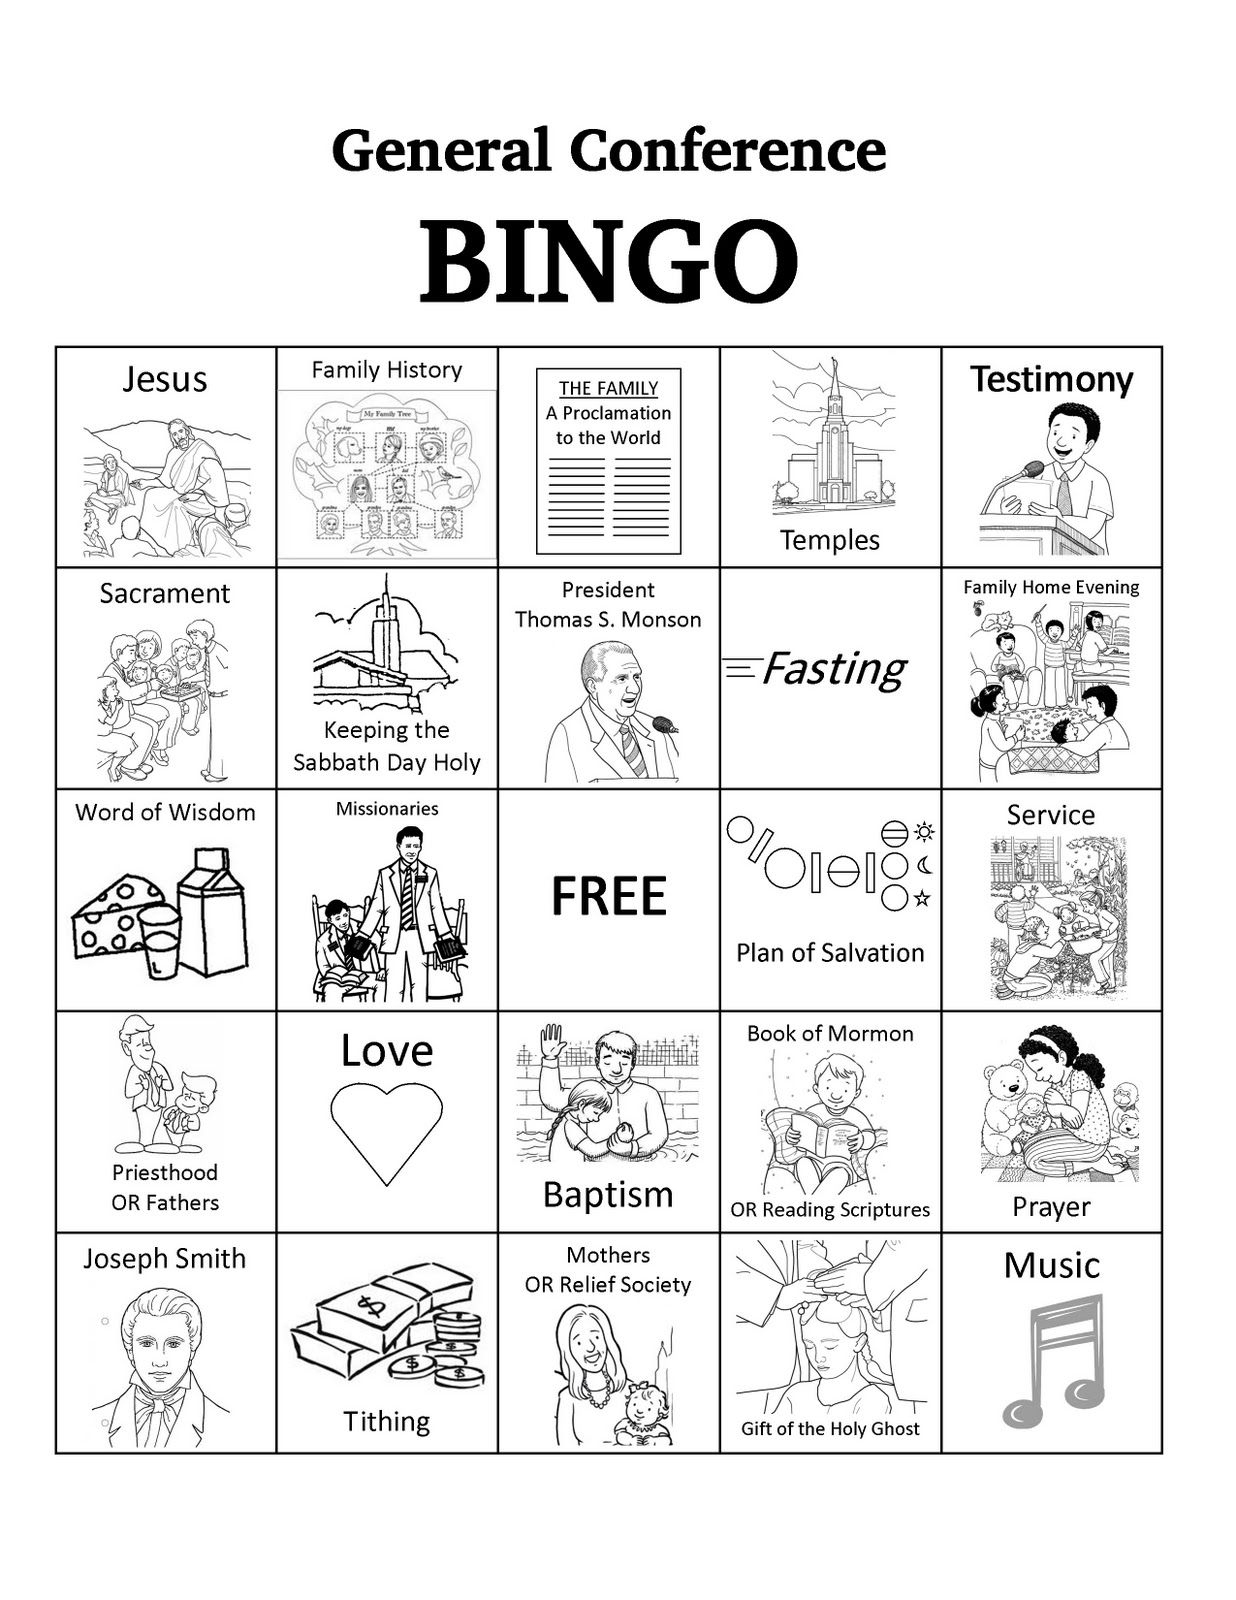 Bits Of Everything: Free Download: General Conference Bingo